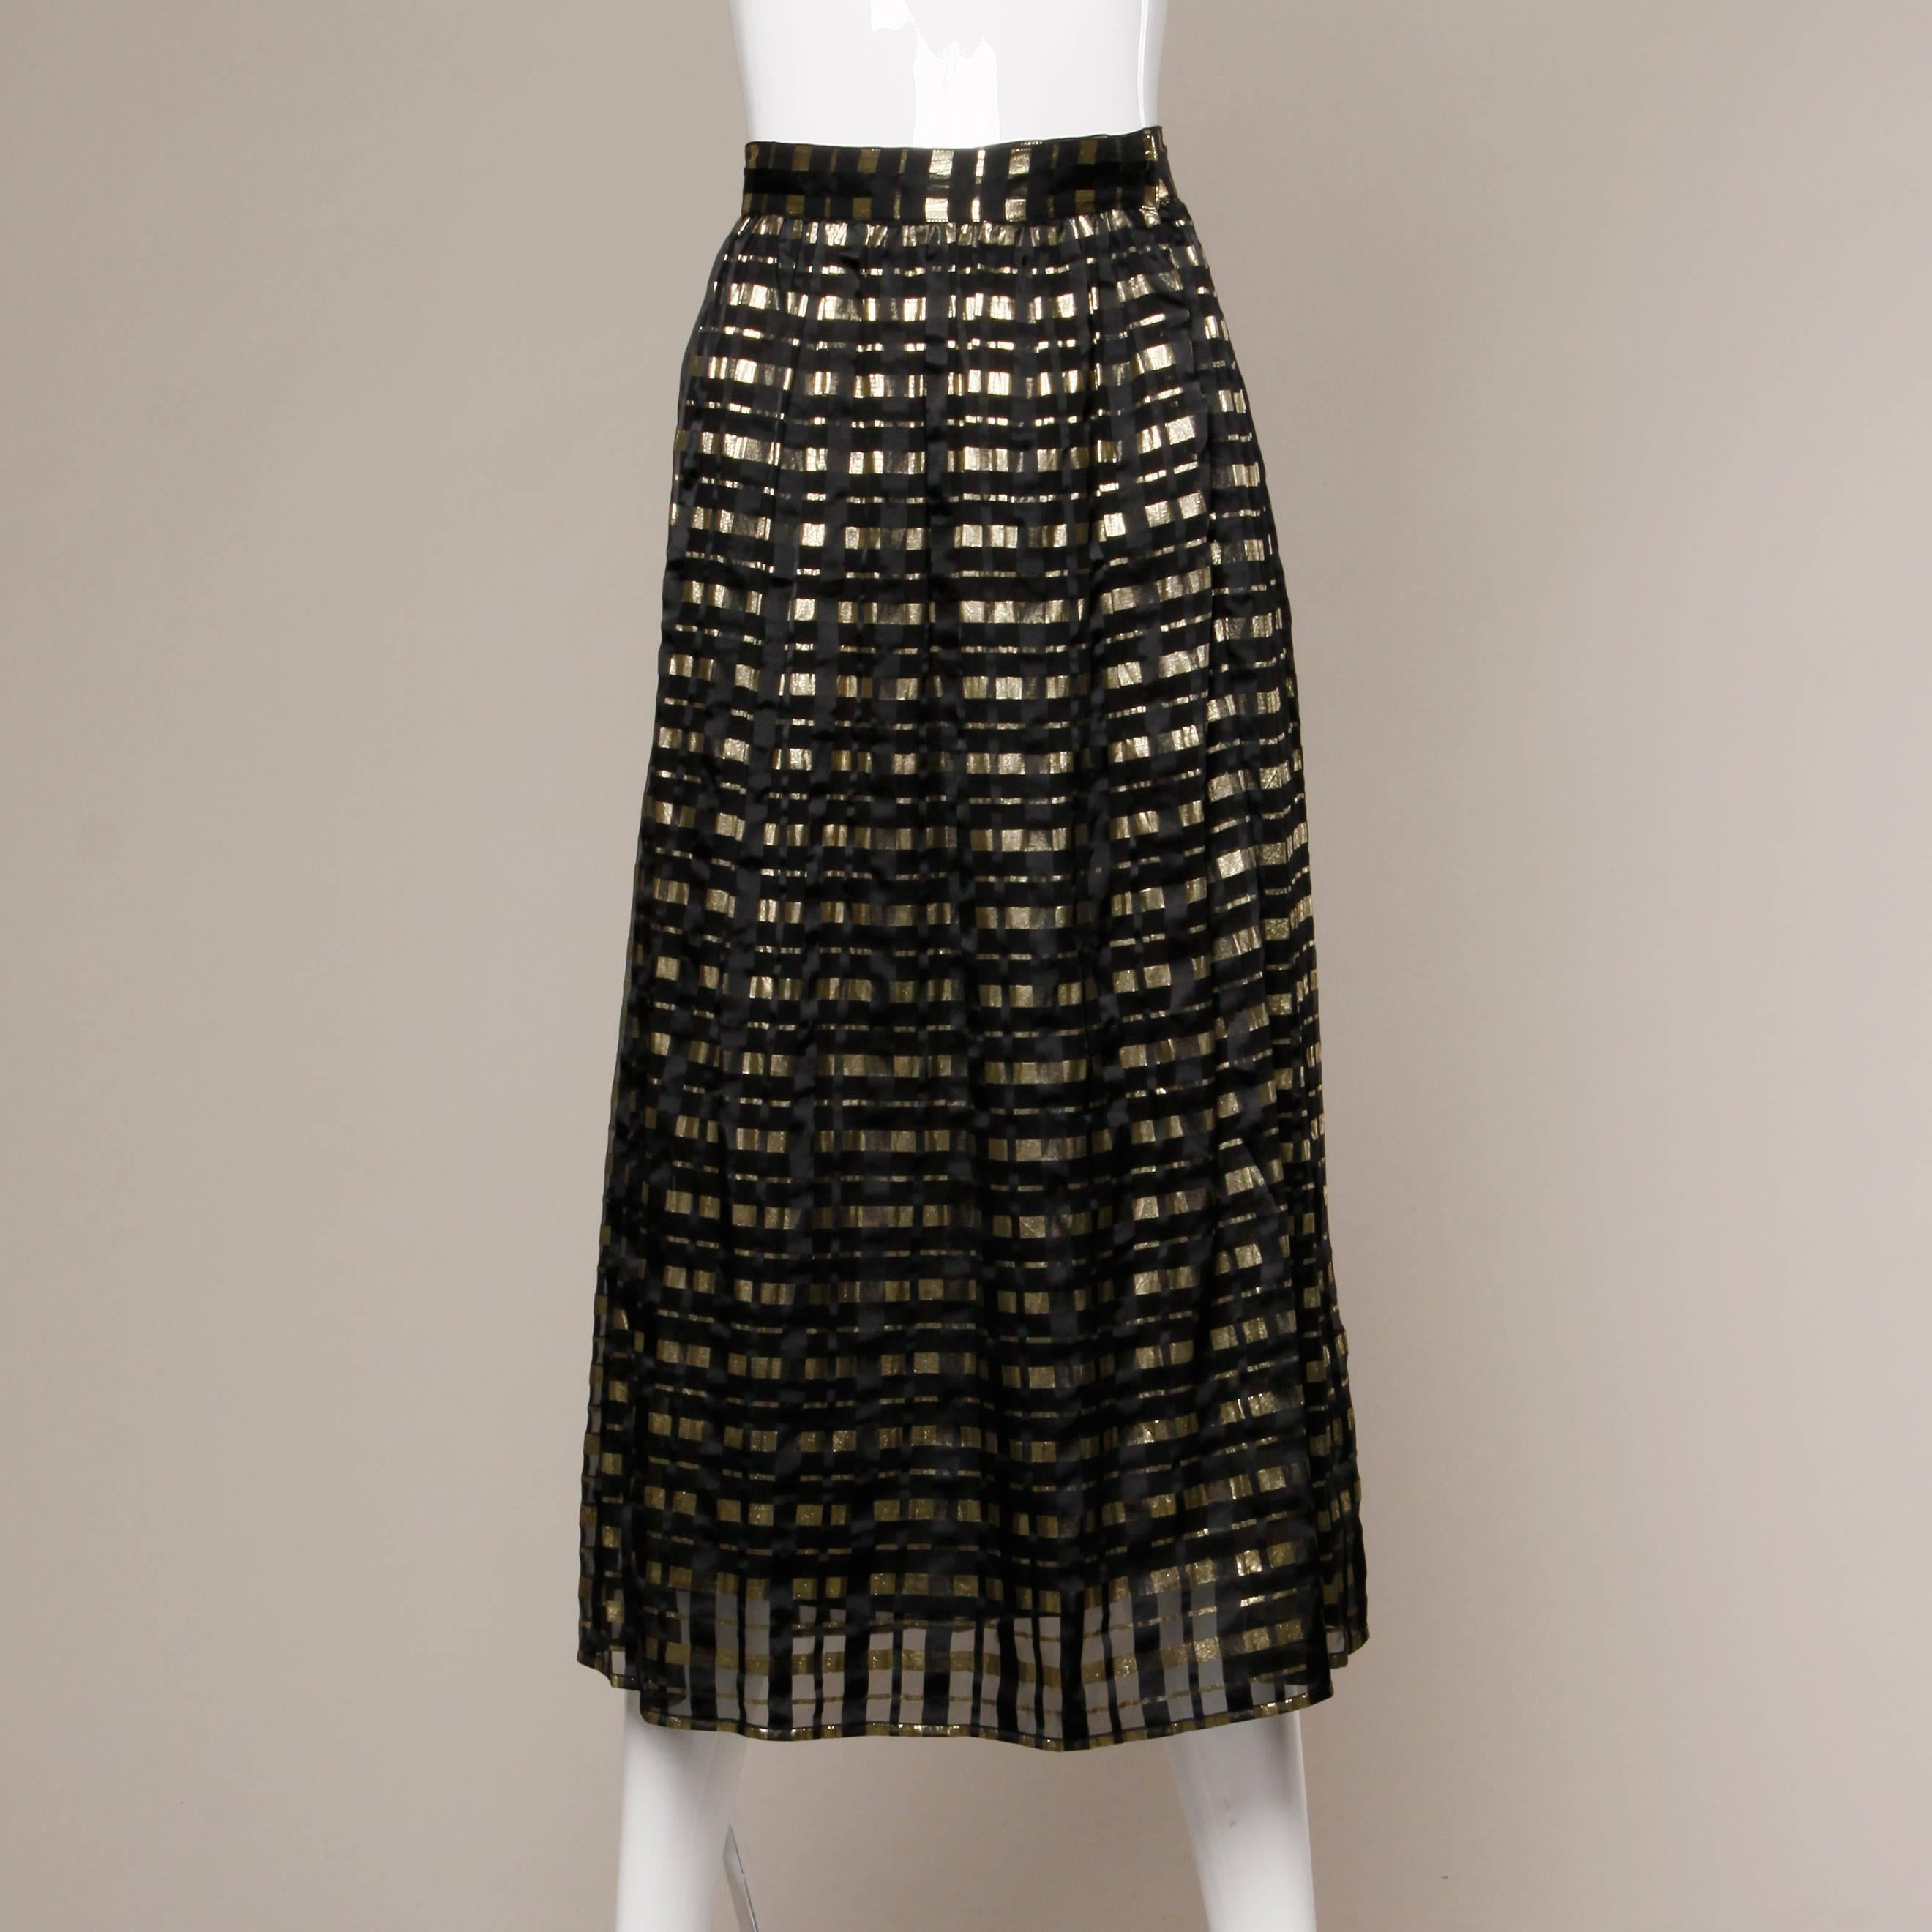 Gorgeous paper thin metallic gold and black silk chiffon ensemble. The blouse is unlined and is completely sheer. The skirt is pleated and lined in black silk. The measurements are as follows:

Blouse Measurements

    Bust: 39